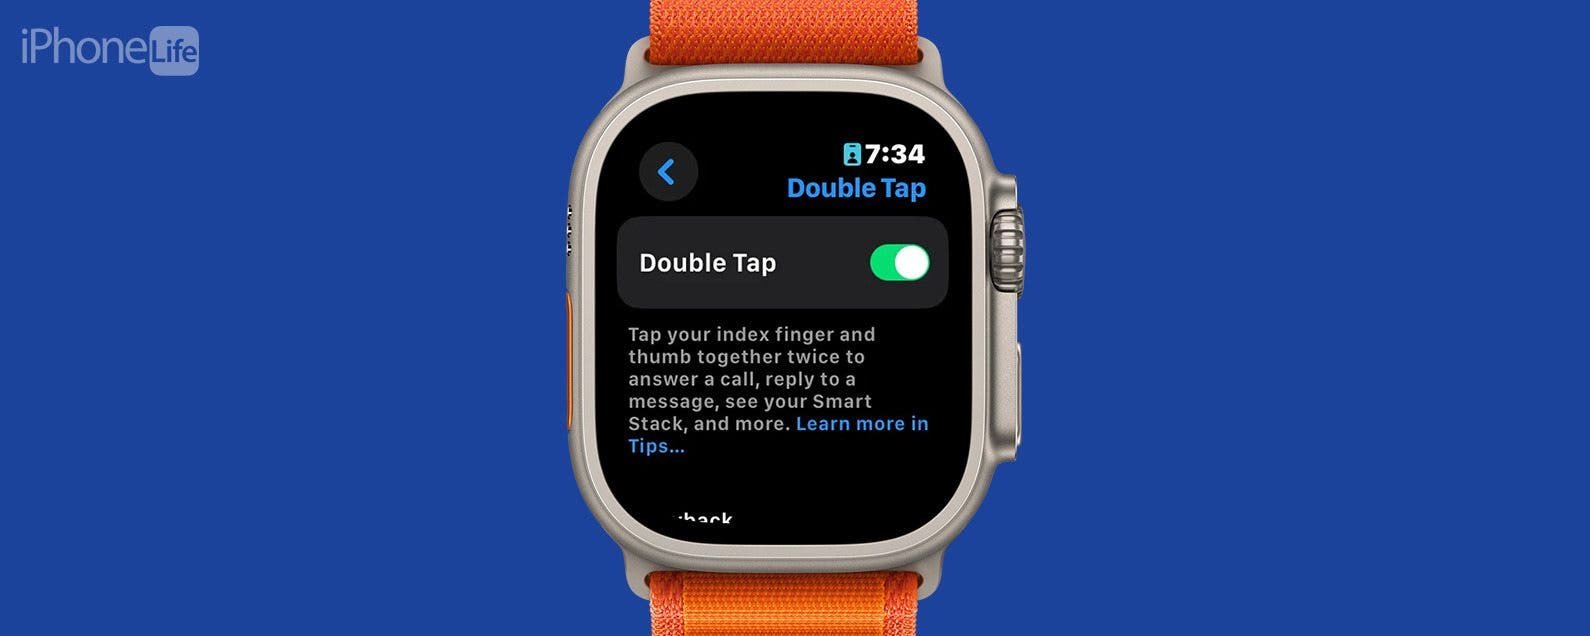 Apple Watch Series 9, Apple Watch Ultra 2 With S9 SiP, Double Tap Gesture  Launched in India : Details | Technology News